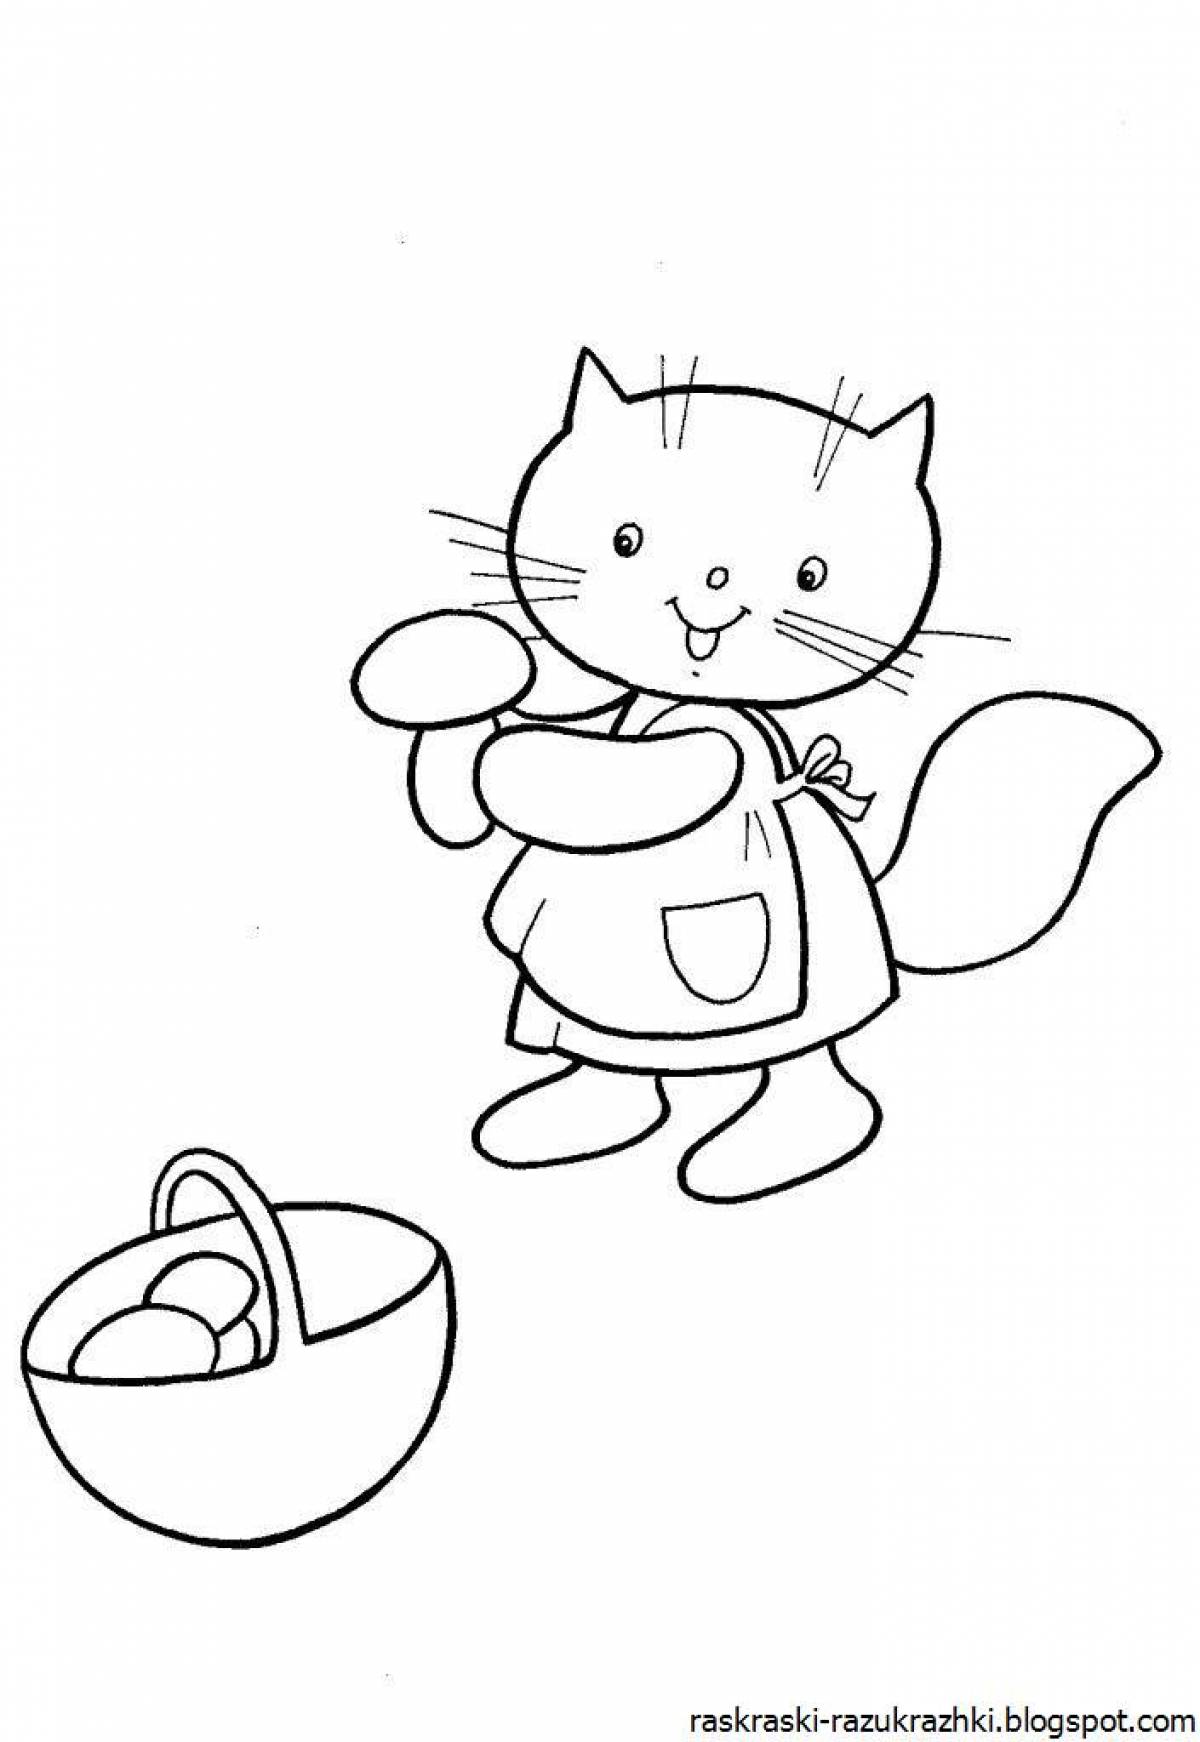 Tiny kitten coloring book for kids